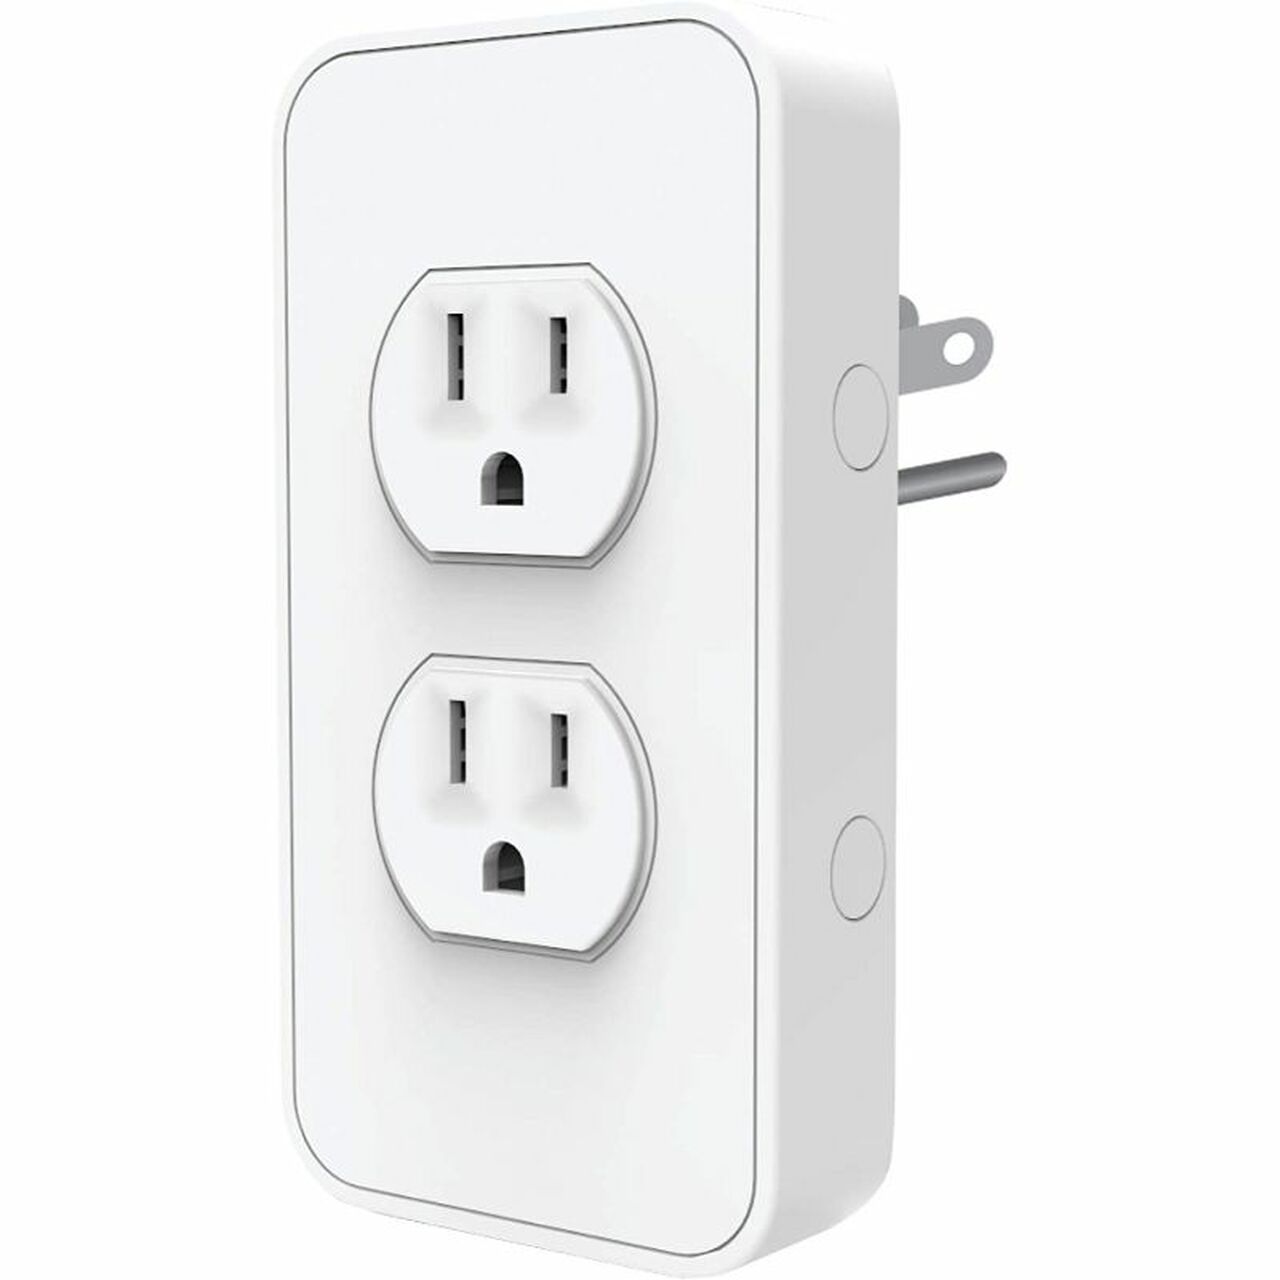 SimplySmartHome by Switchmate products starting at $8.99 + FS